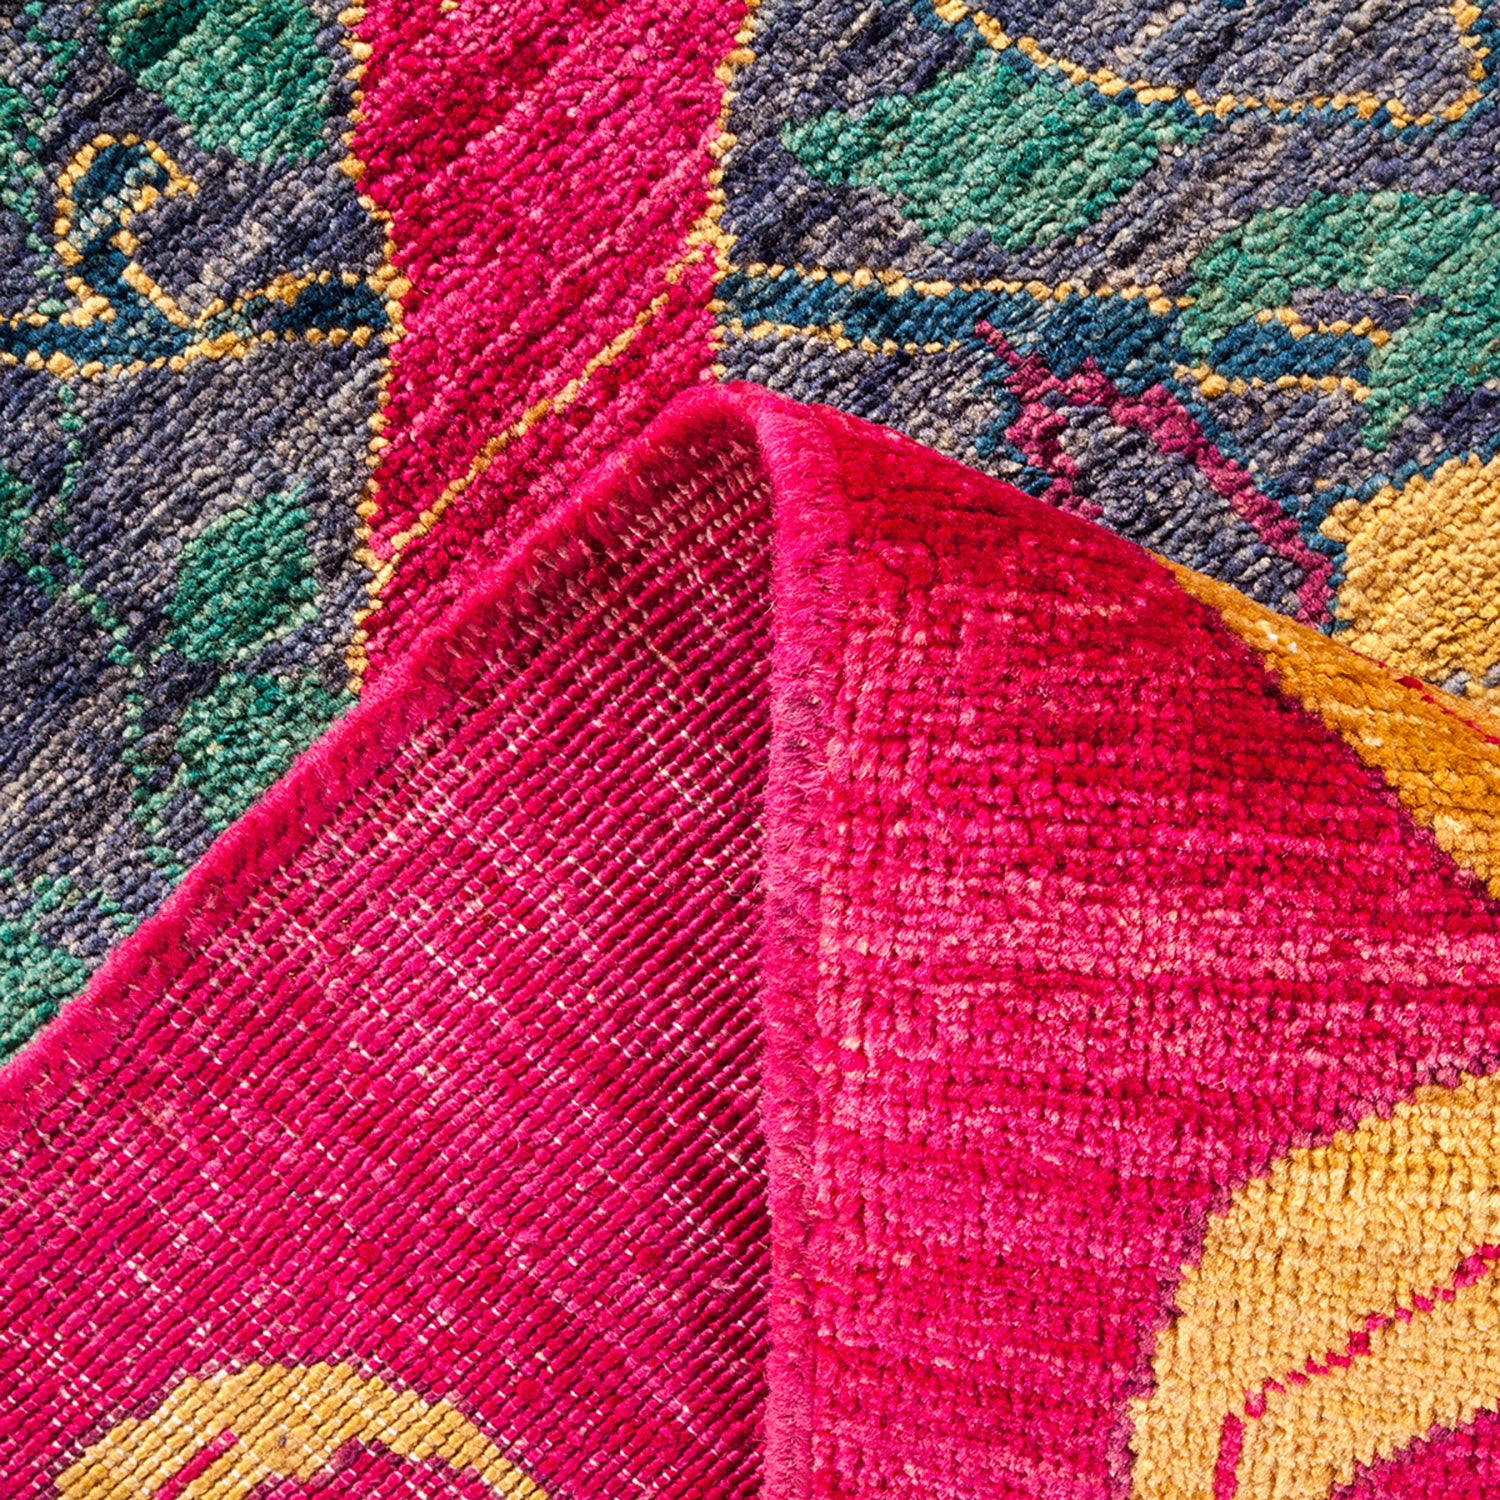 Close-up of a vibrant, thick textile with intricate geometric patterns.